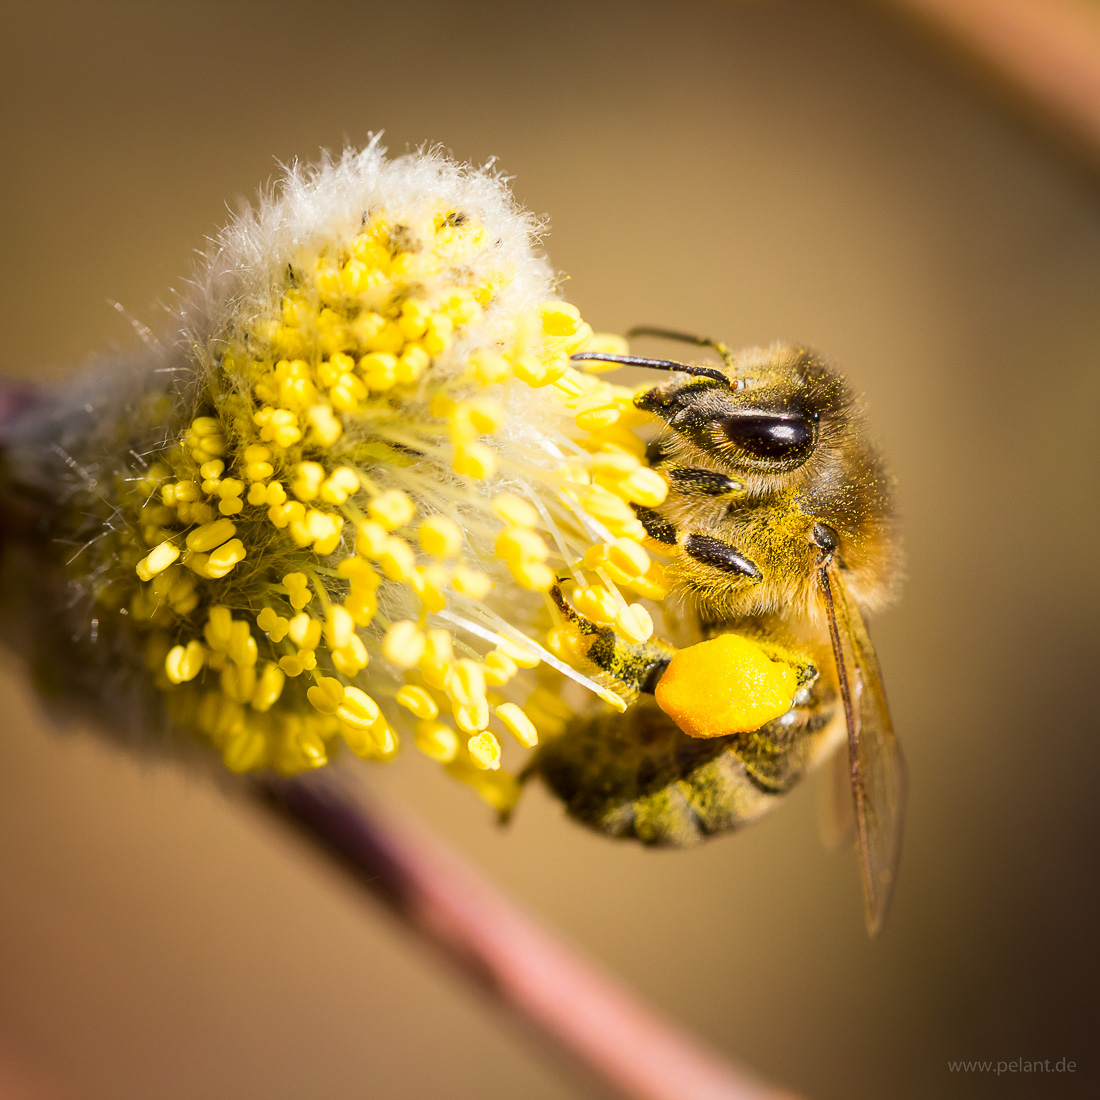 willow catkin with bee